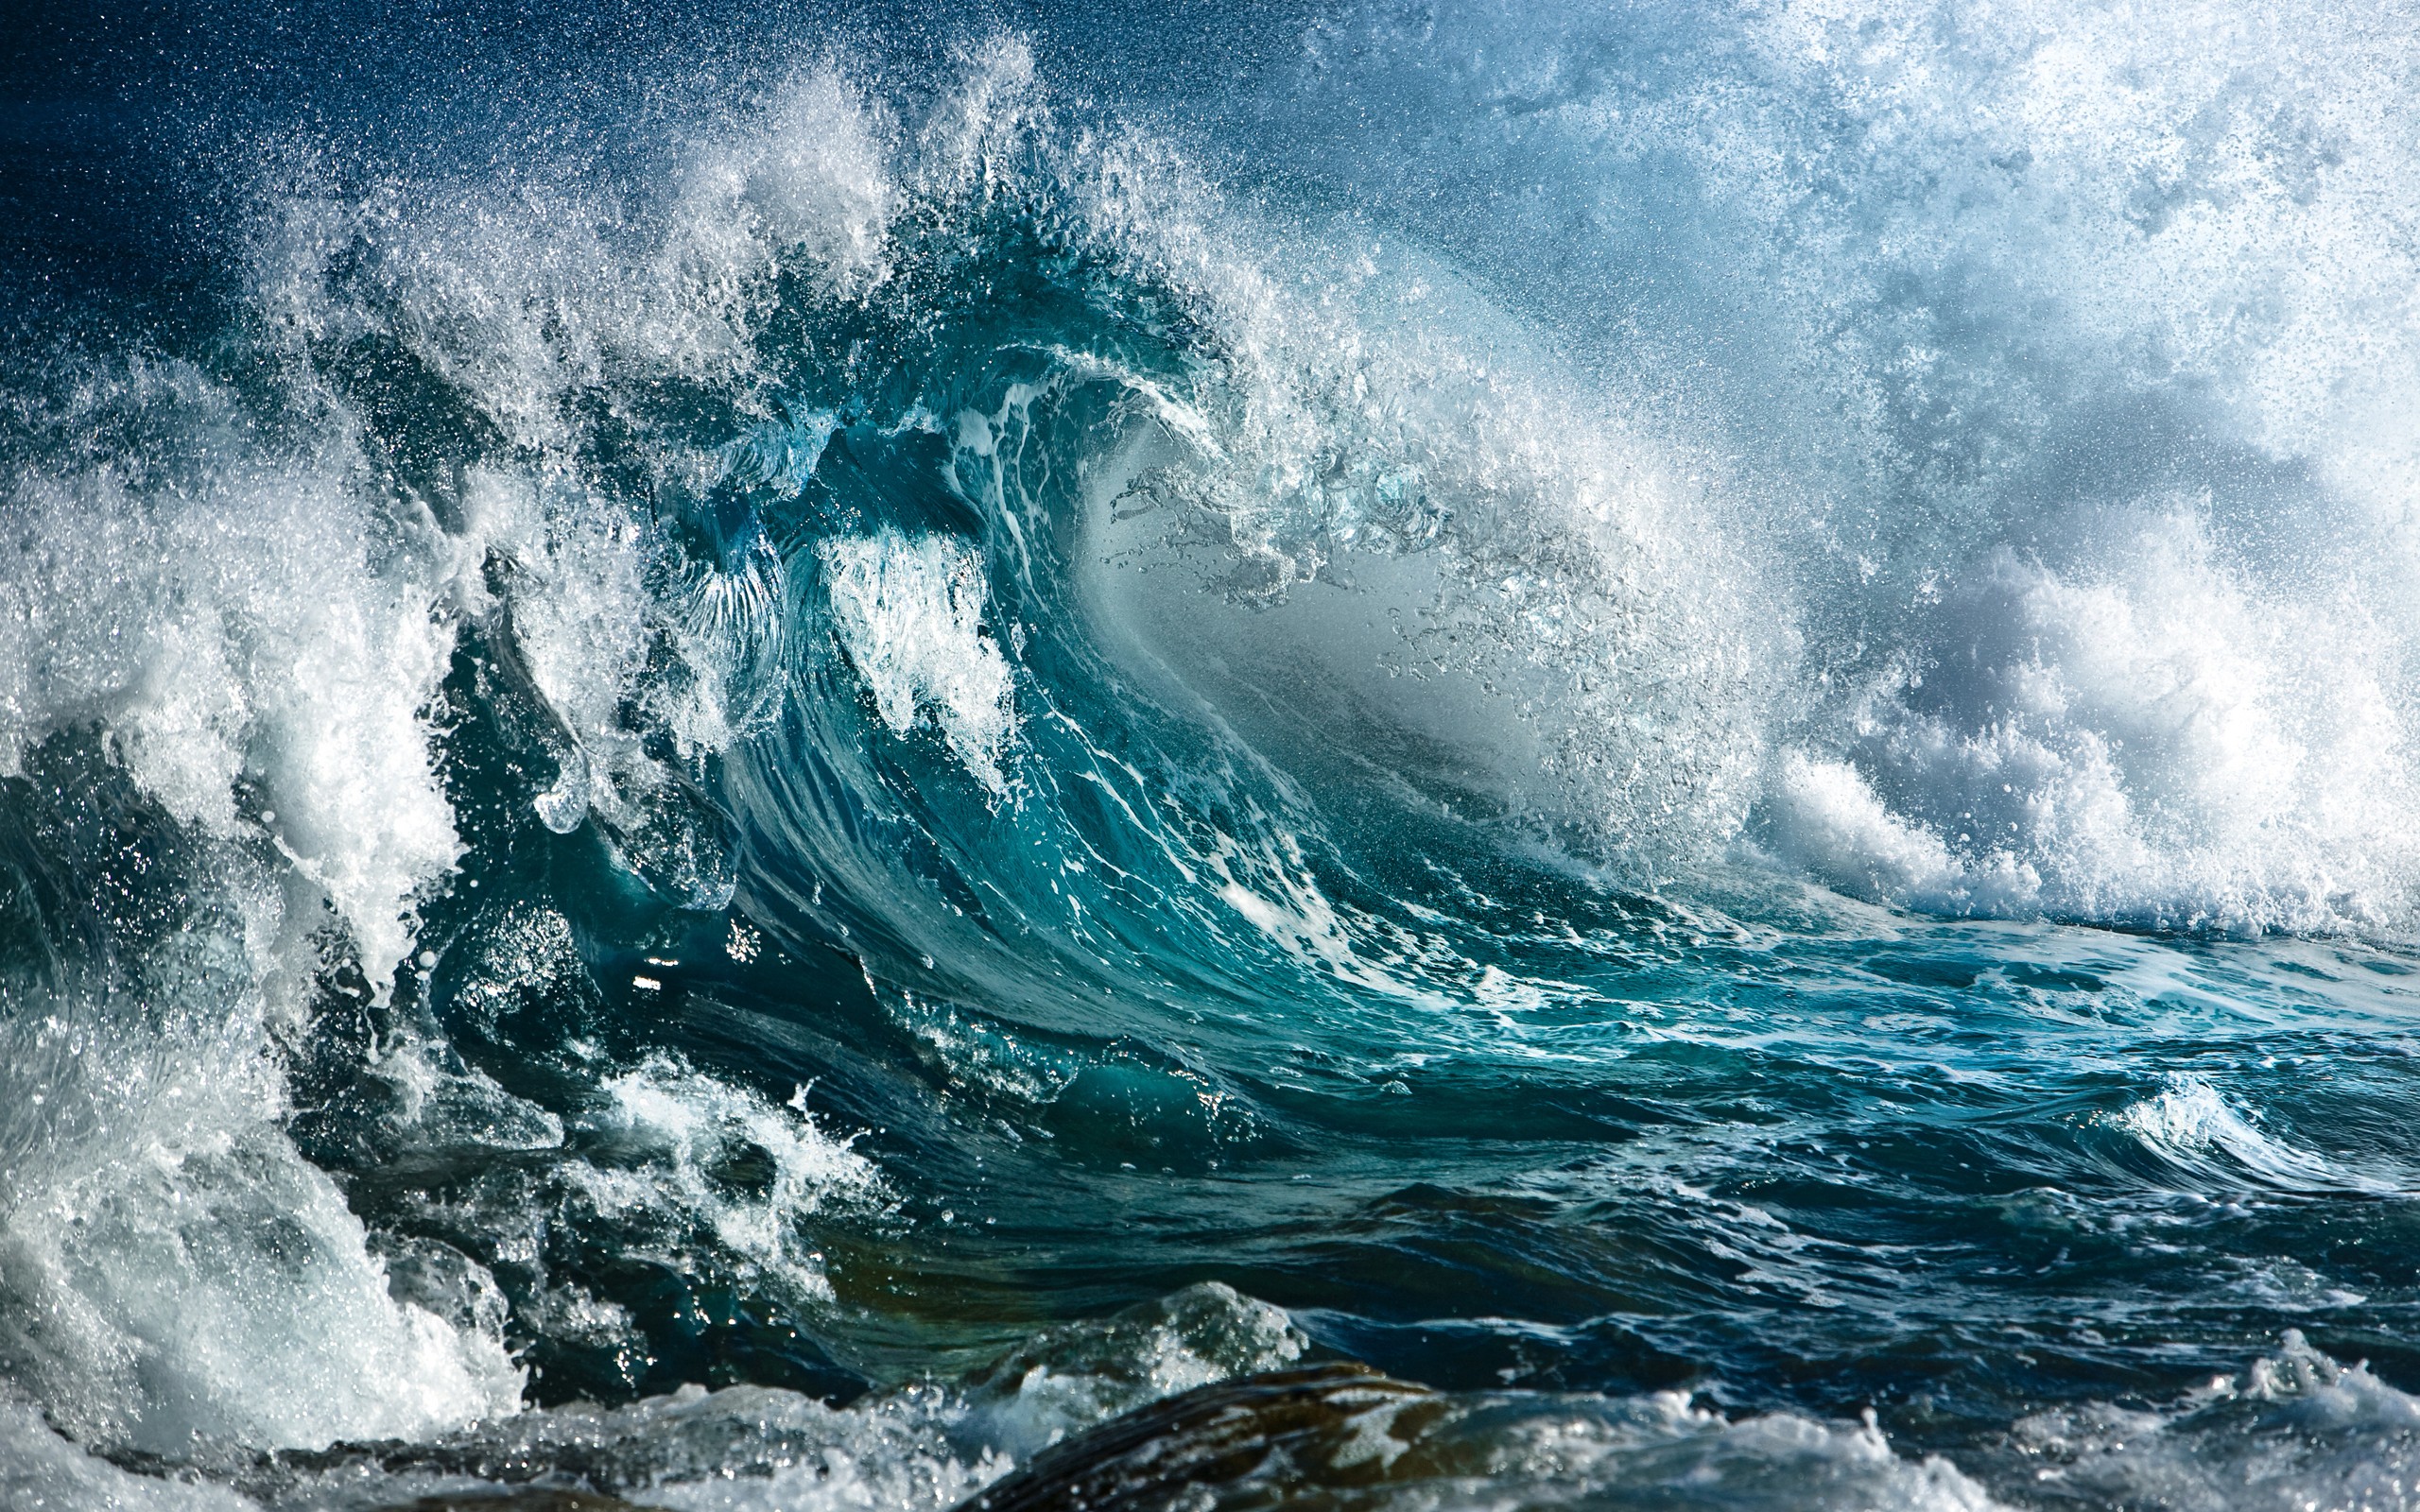 Water Wave Wallpaper Ourimgscom The Hippest Galleries 2560x1600px